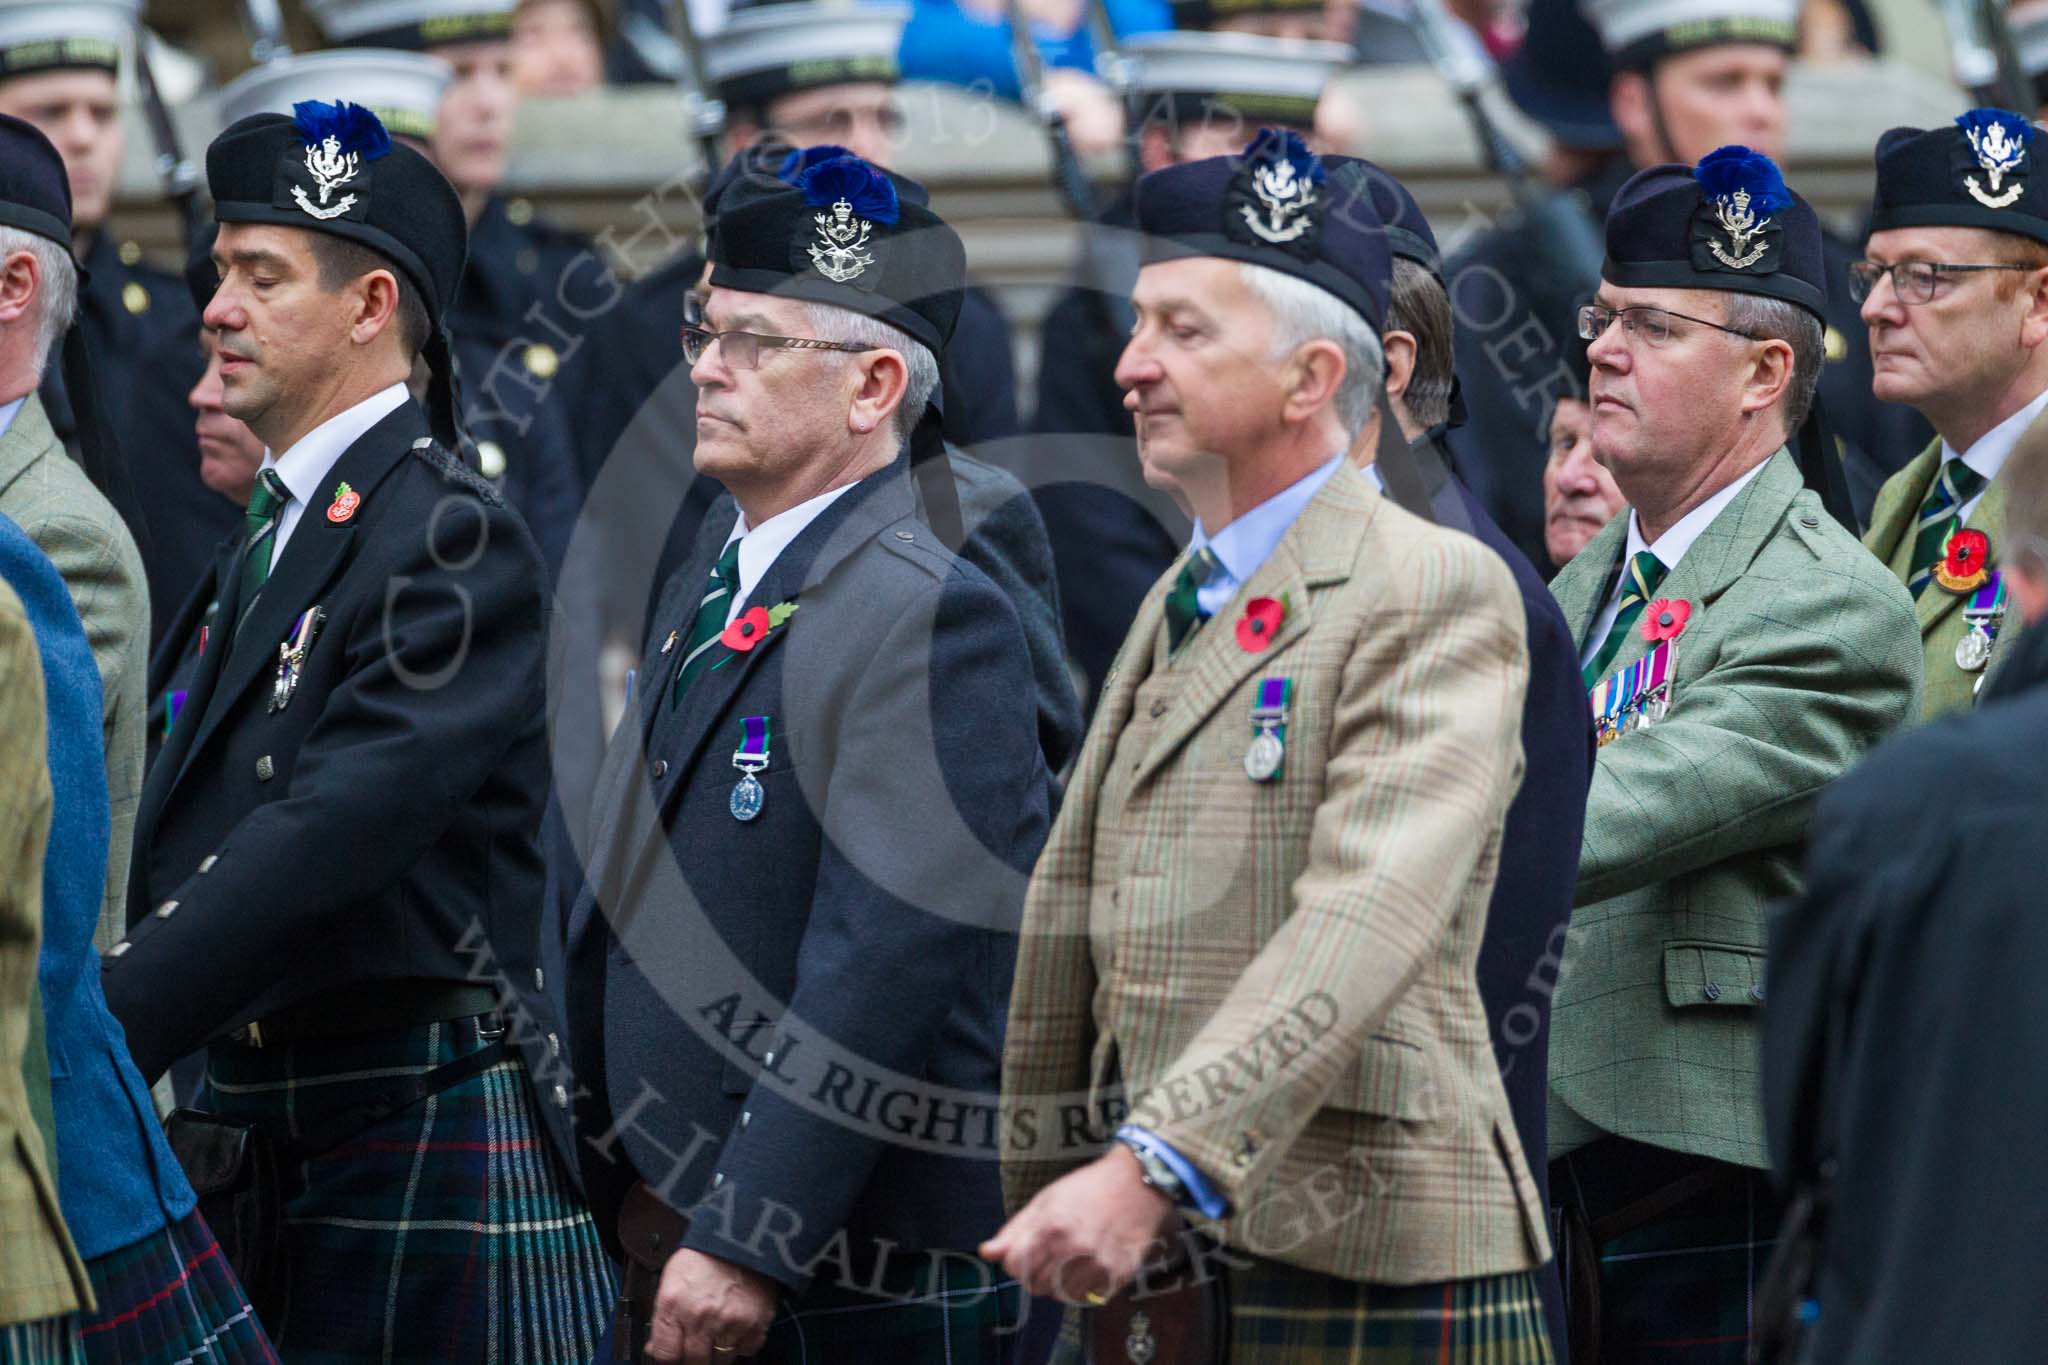 Remembrance Sunday at the Cenotaph 2015: Group A8, Queen's Own Highlanders Regimental Association.
Cenotaph, Whitehall, London SW1,
London,
Greater London,
United Kingdom,
on 08 November 2015 at 12:10, image #1232